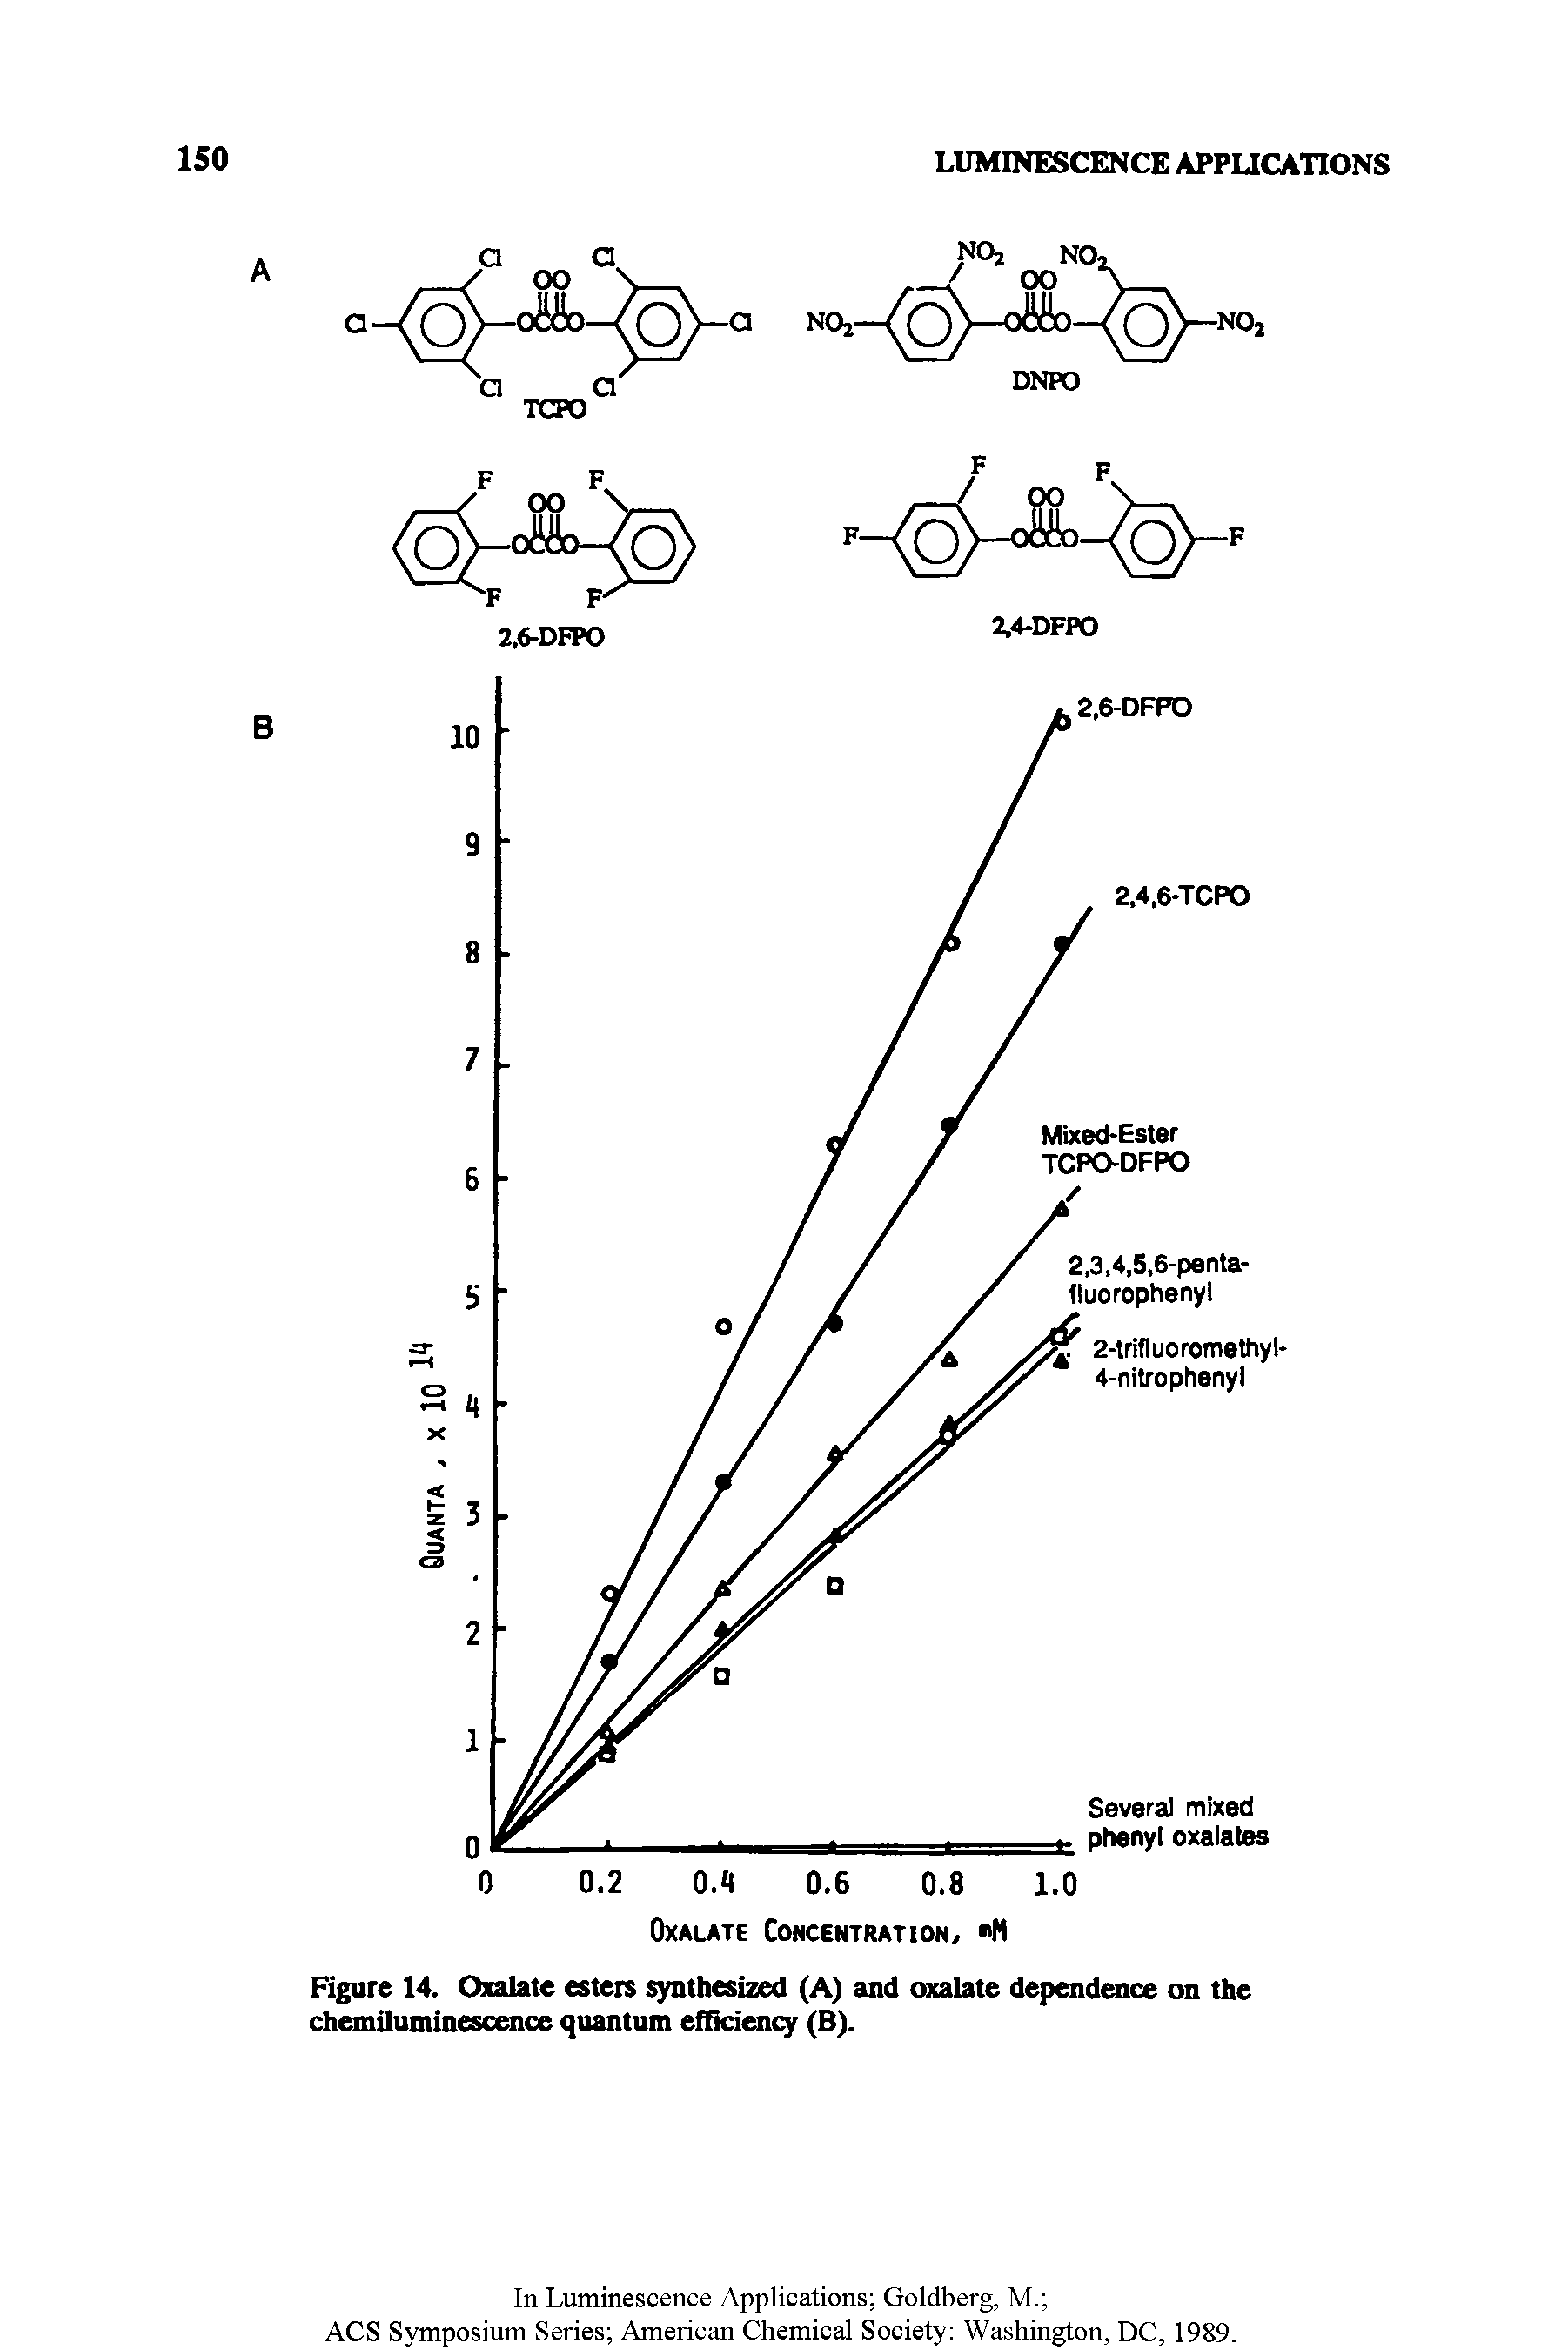 Figure 14. Oxalate esters synthesized (A) and oxalate dependence on the chemiluminescence quantum efficiency (B).